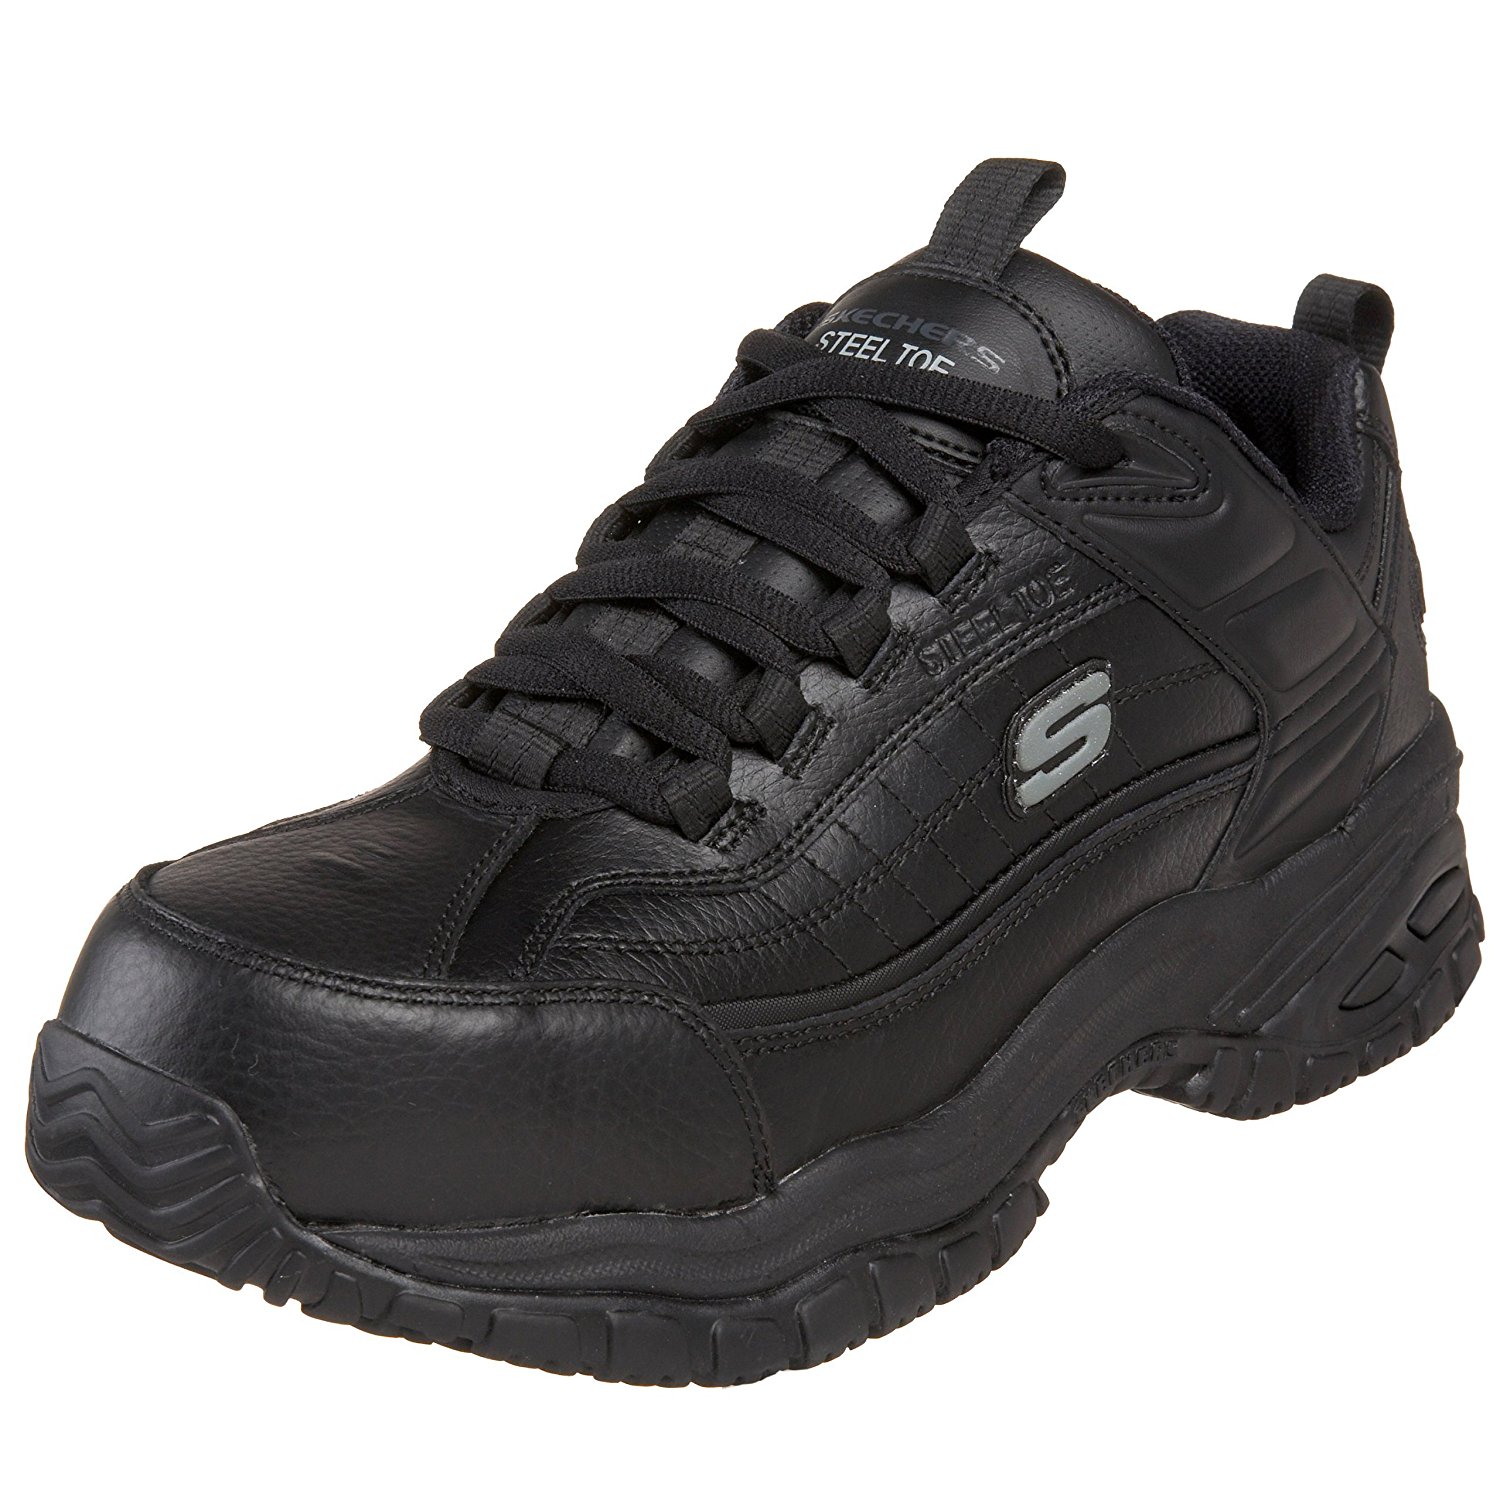 work shoes for men amazon.com: skechers for work menu0027s soft stride steel toe work shoe: shoes TODTEWG